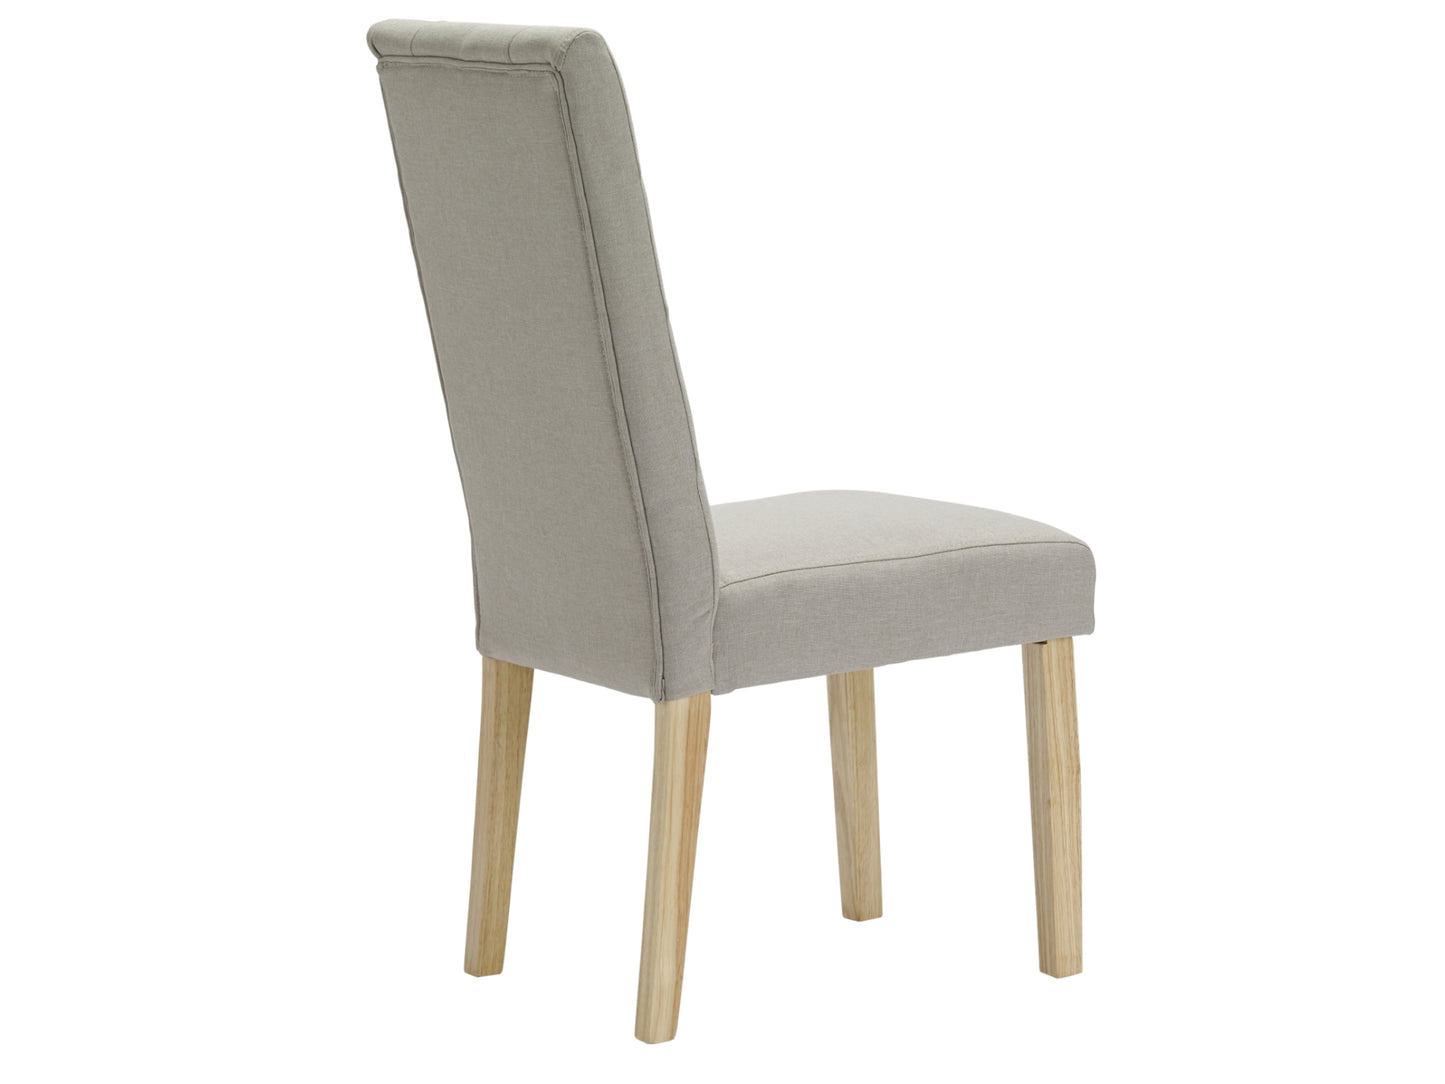 Roma Dining Chair in Beige (2 Pack)